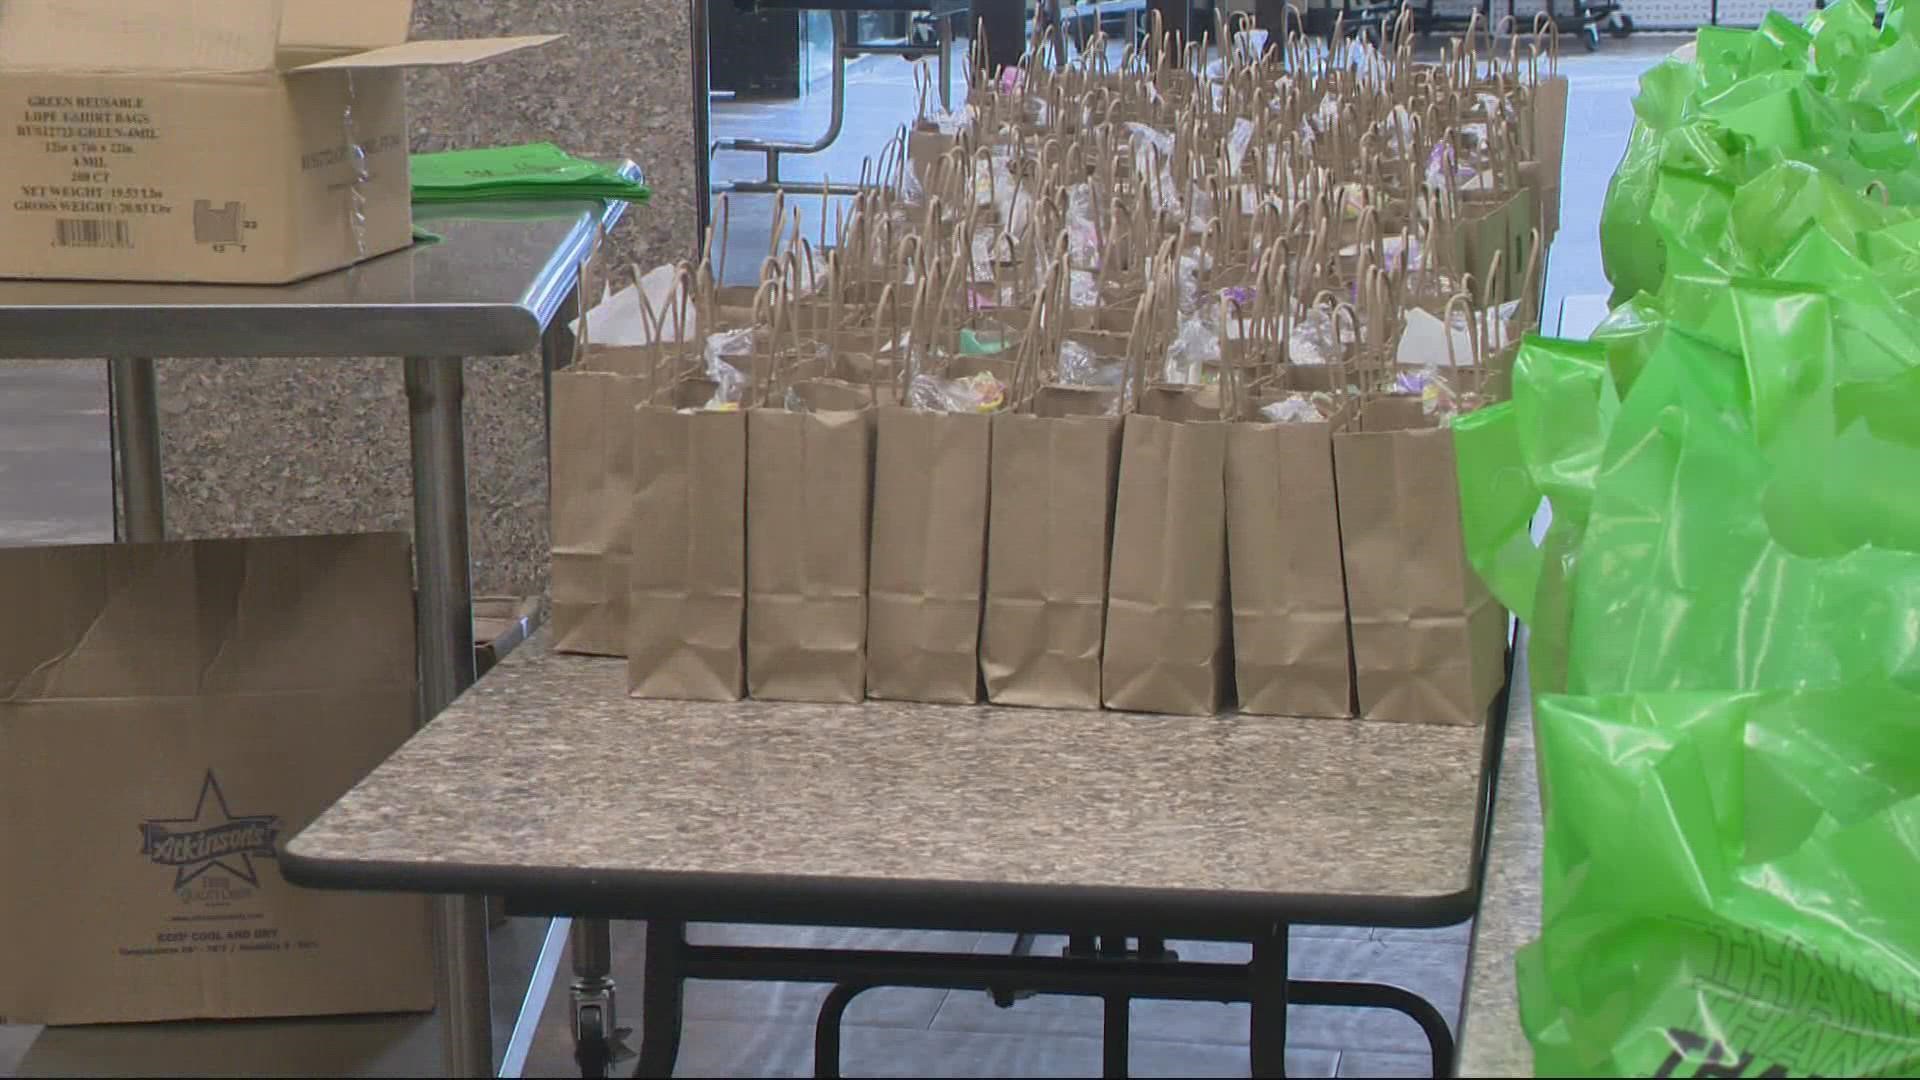 About 300 Easter meals were set to be handed out in downtown Portland on Sunday. The remaining 600 meals are being delivered this week.